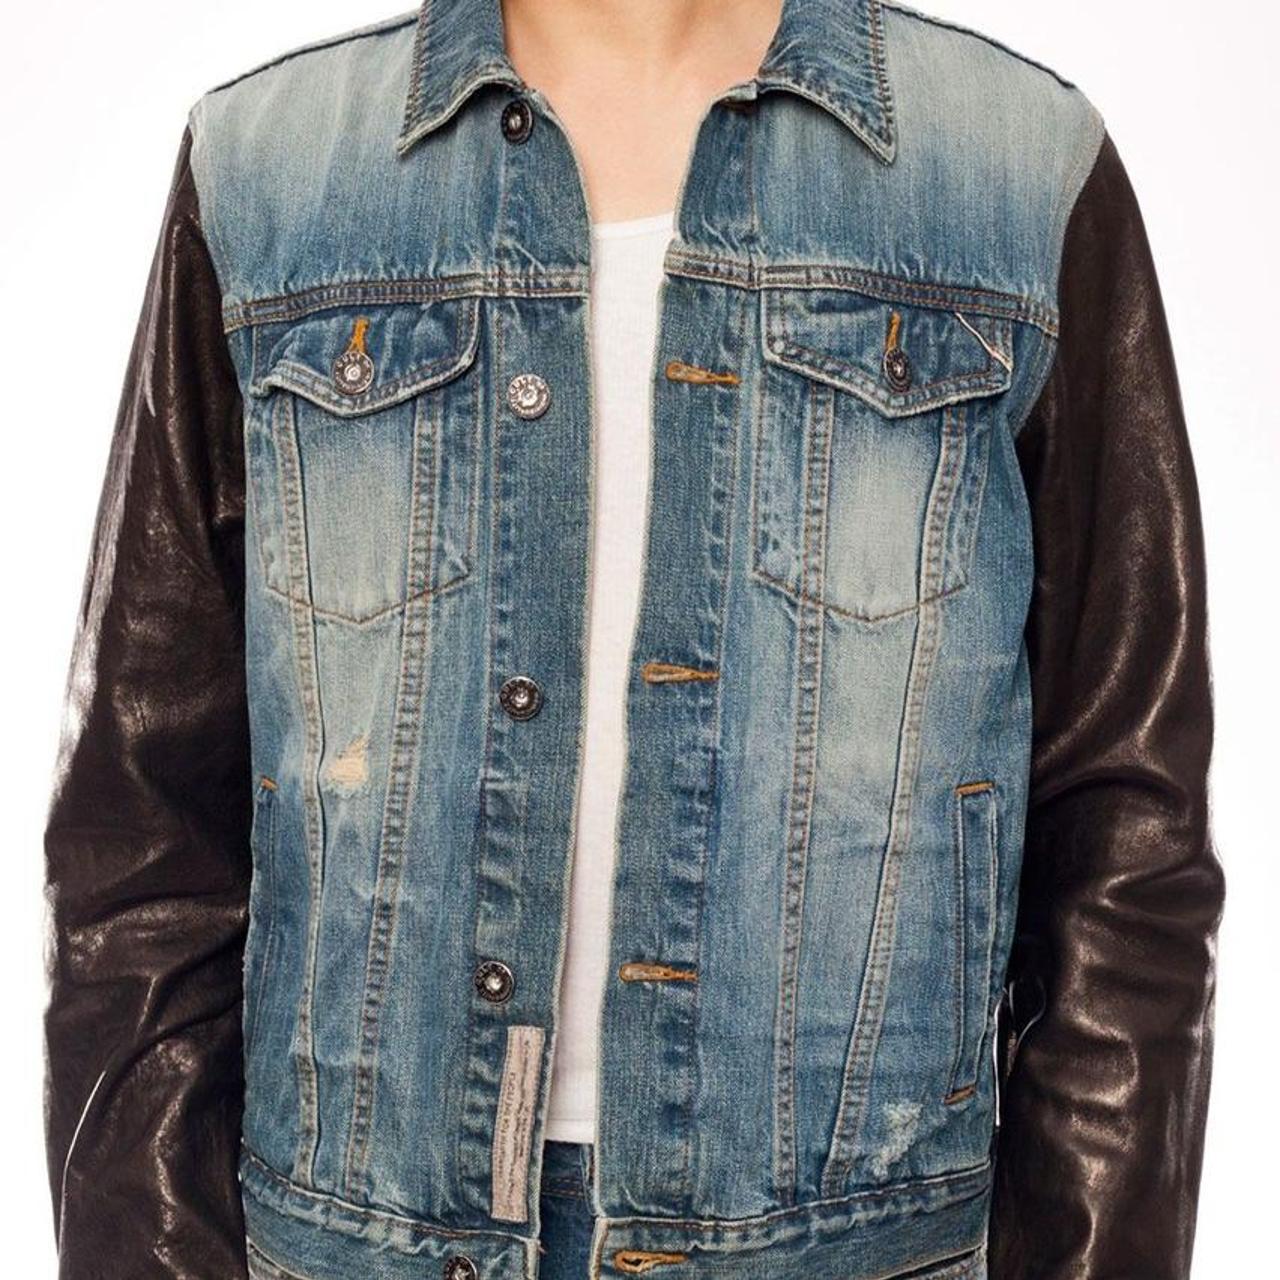 Mens Vintage Look Denim Jacket with Patches and Leather Sleeves in Washed Brown